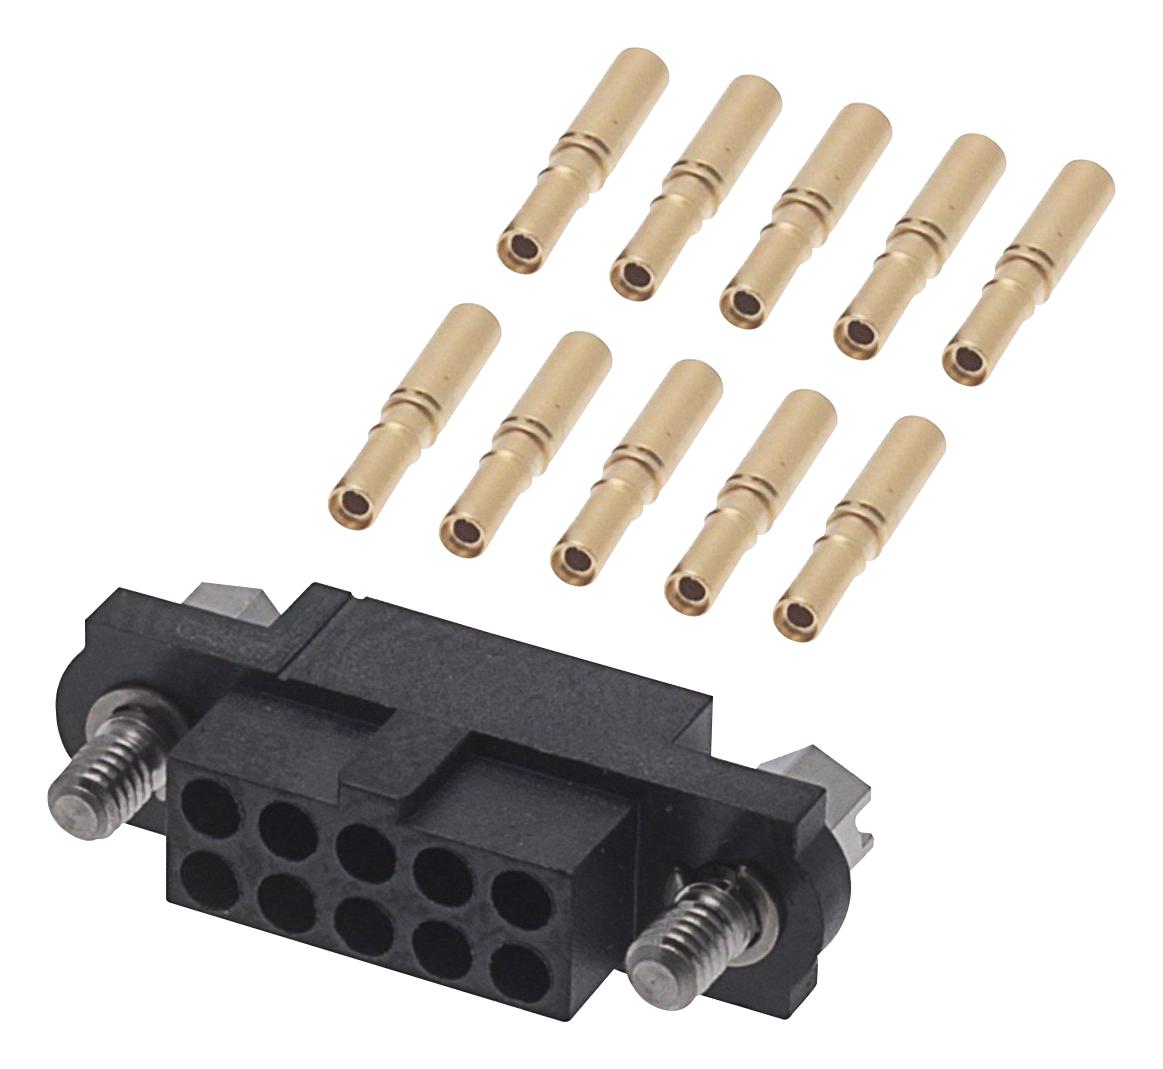 M80-4611005 CONNECTOR, RECEPTACLE, 10POS, 2ROW, 2MM HARWIN